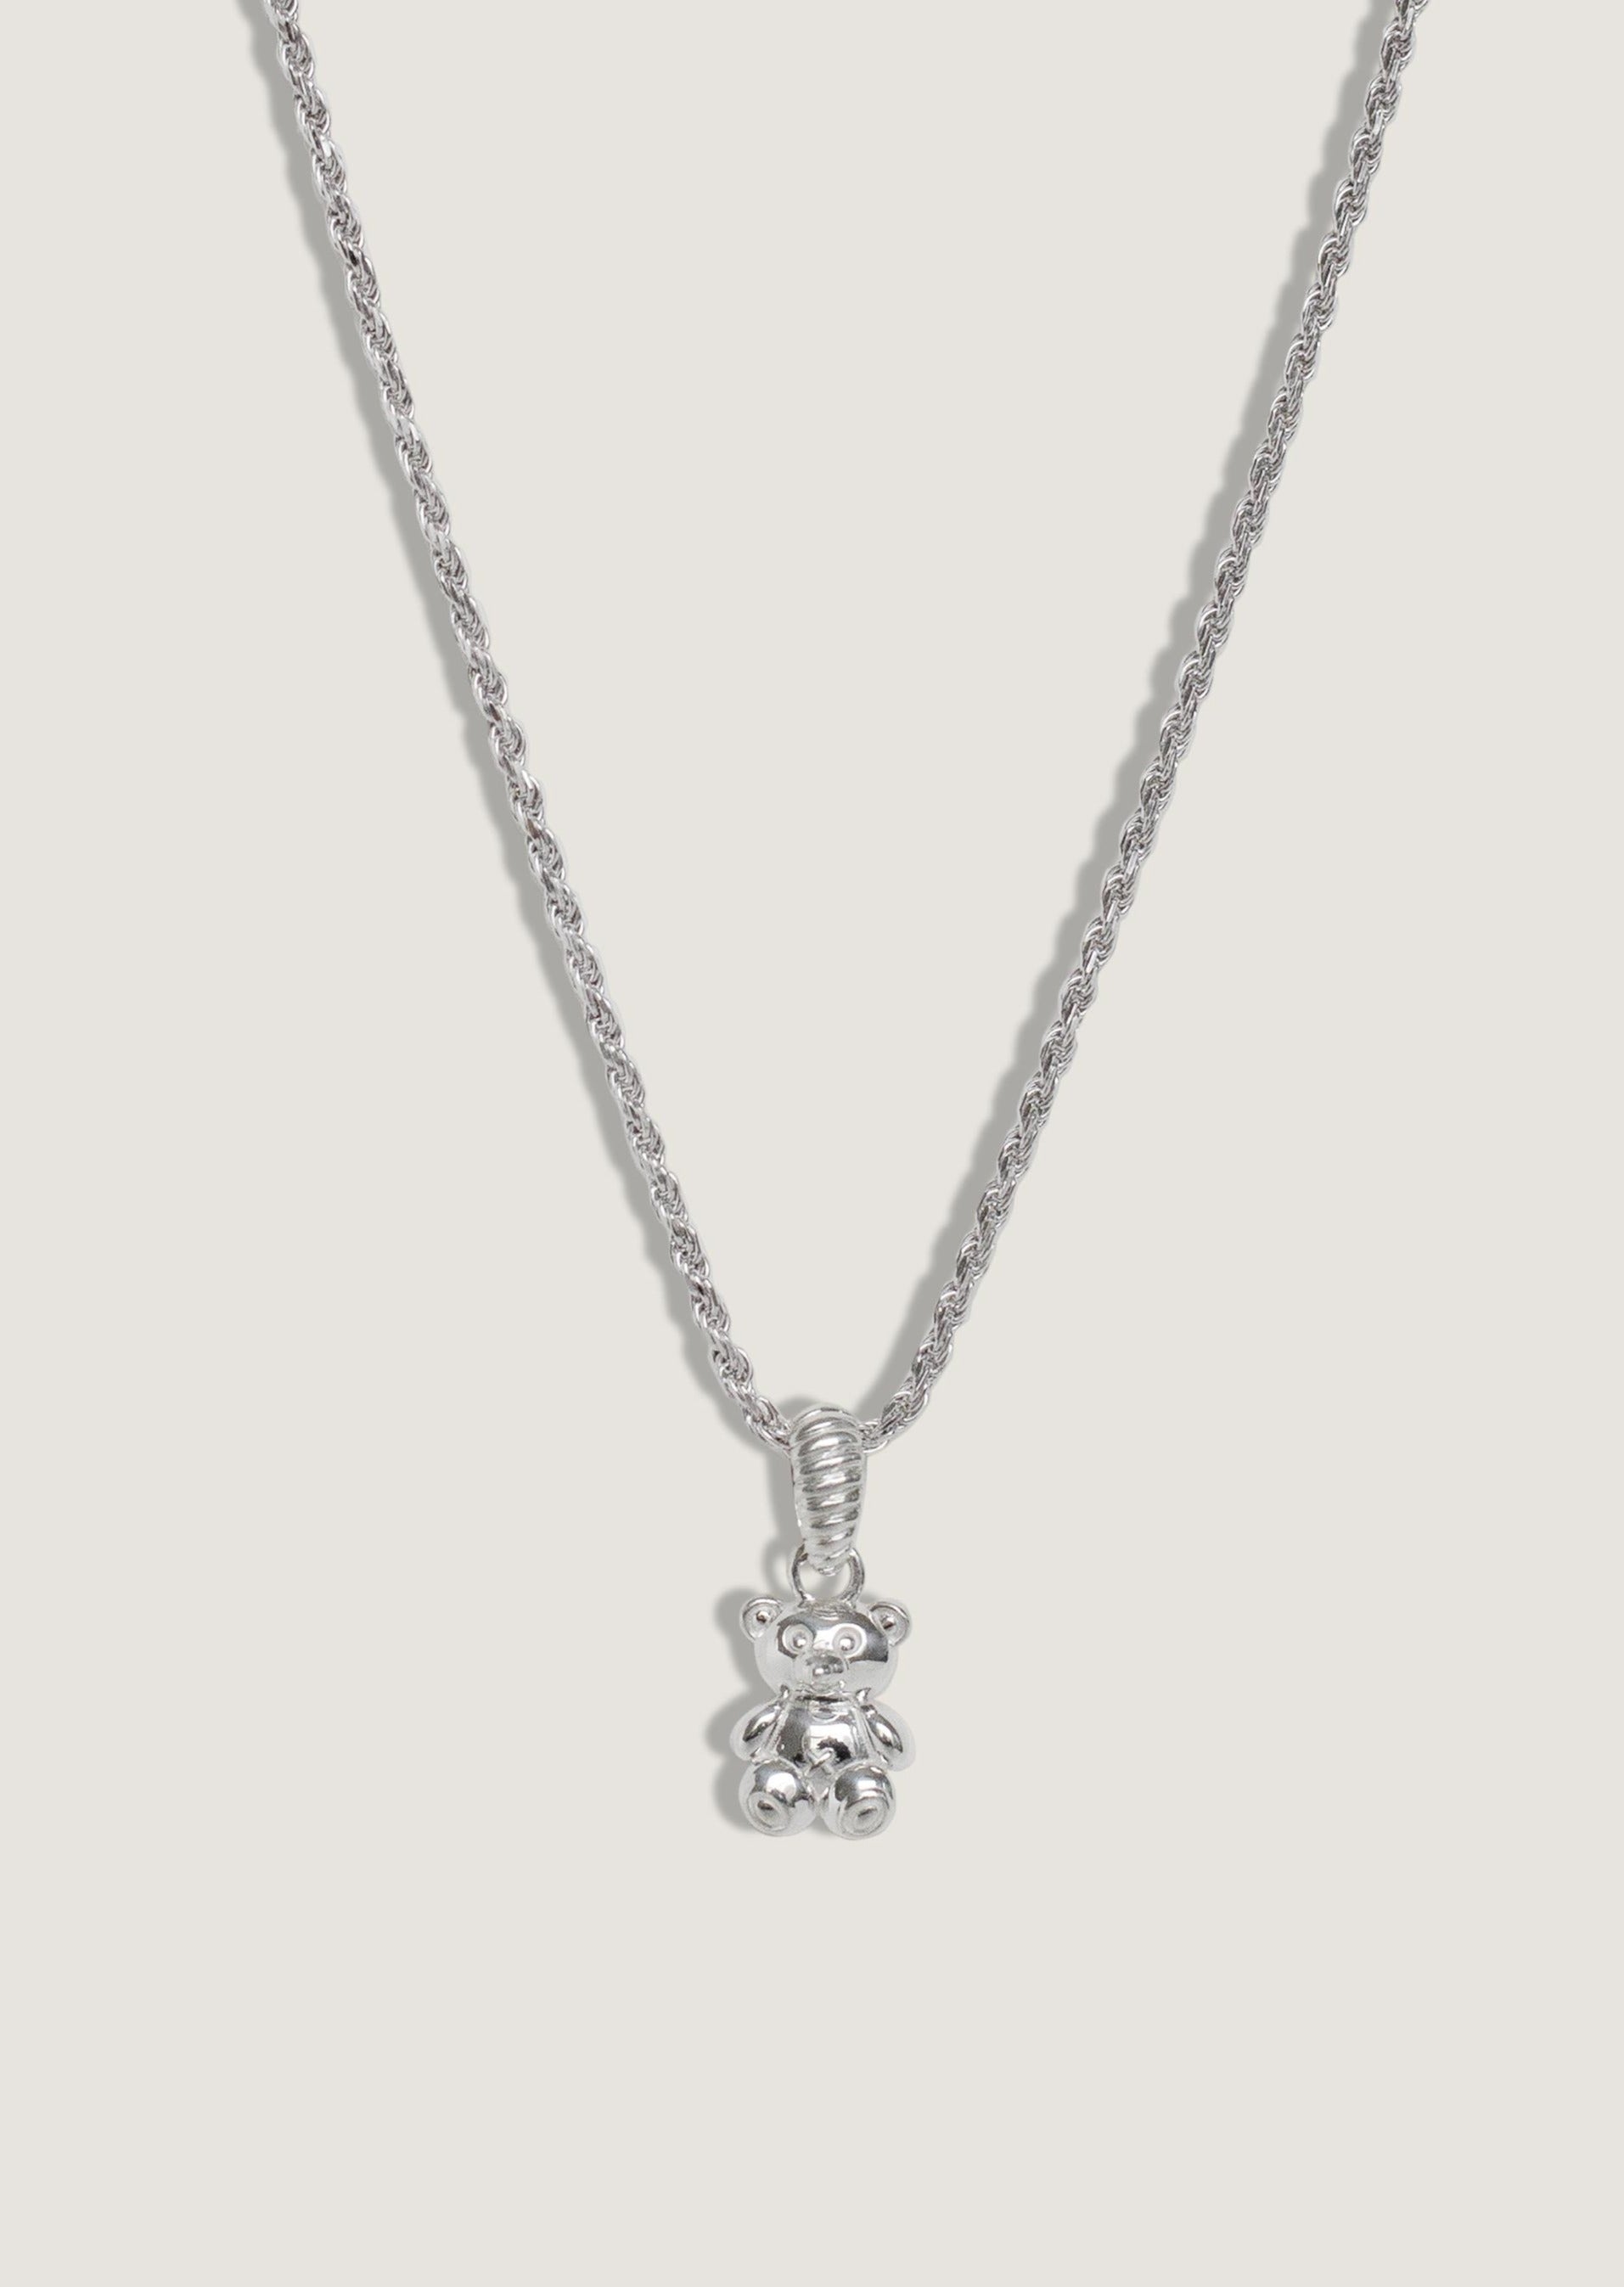 Oliver Teddy Bear Necklace Silver